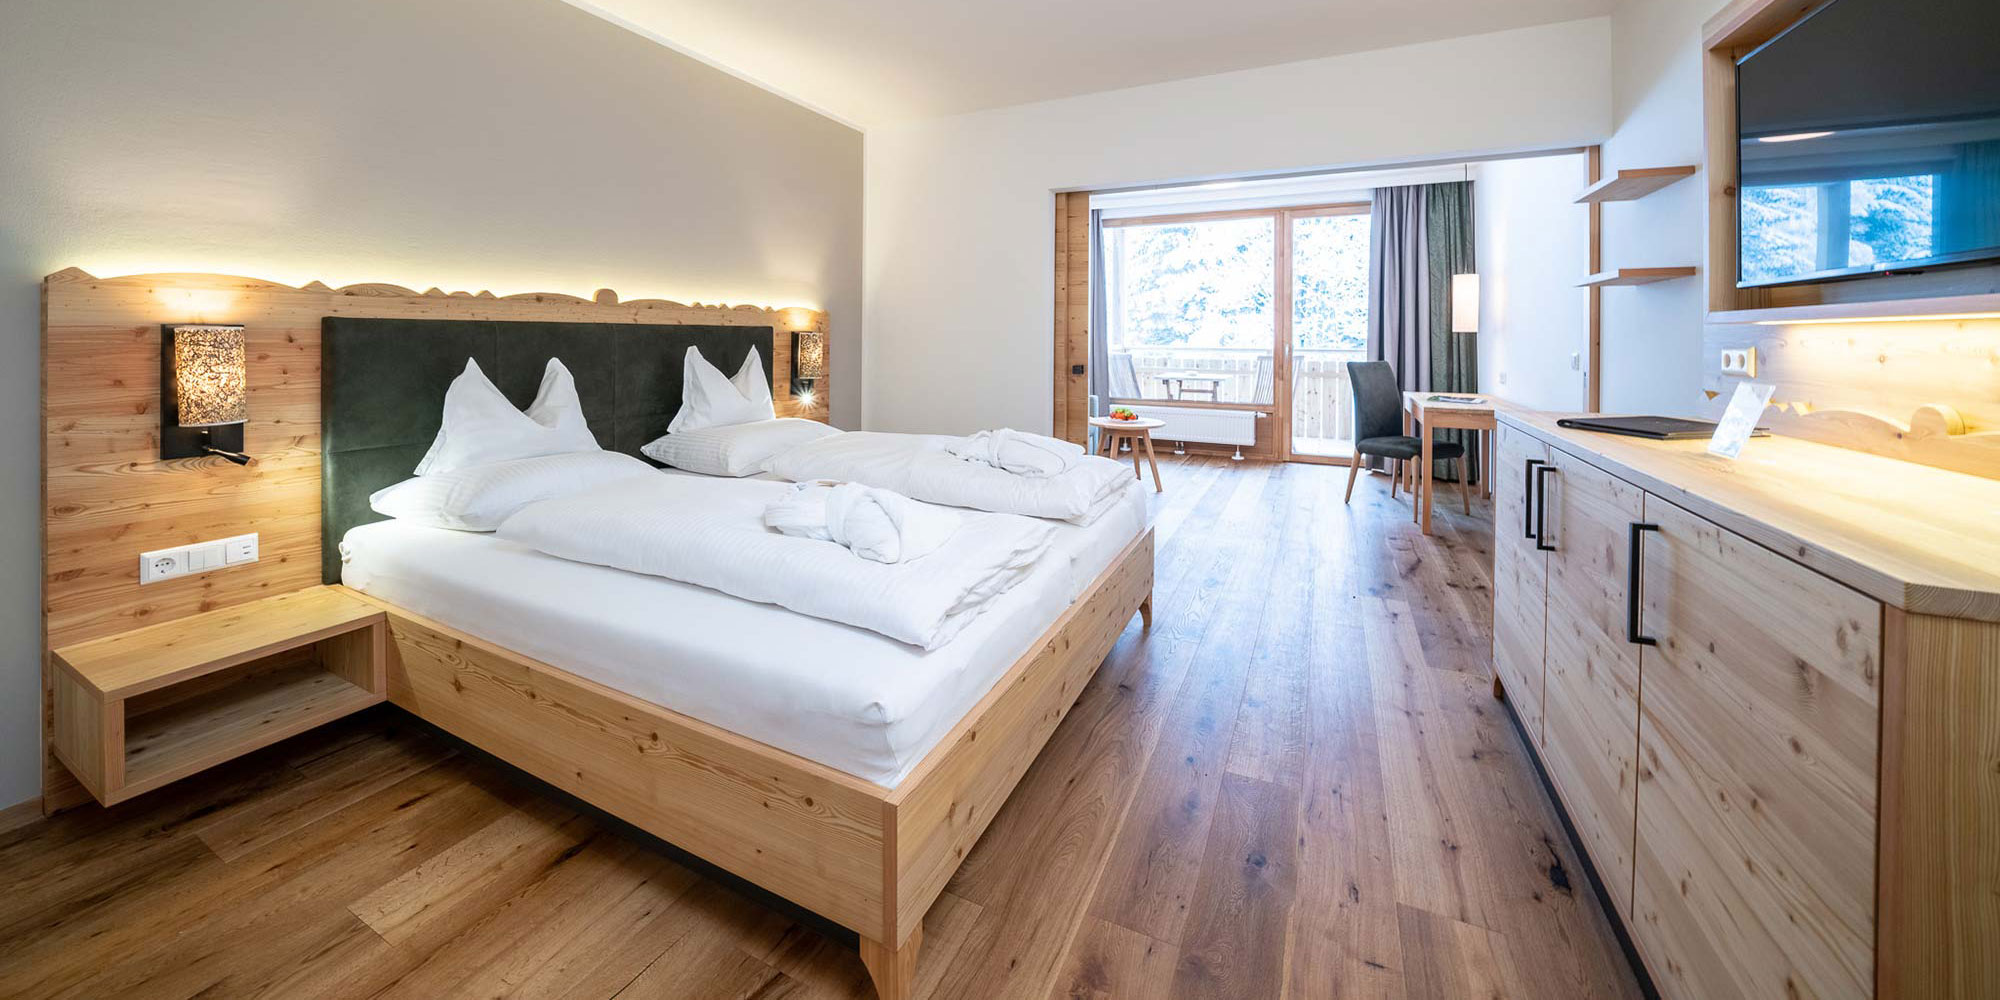 A large and bright hotel room with many wooden elements and a balcony.